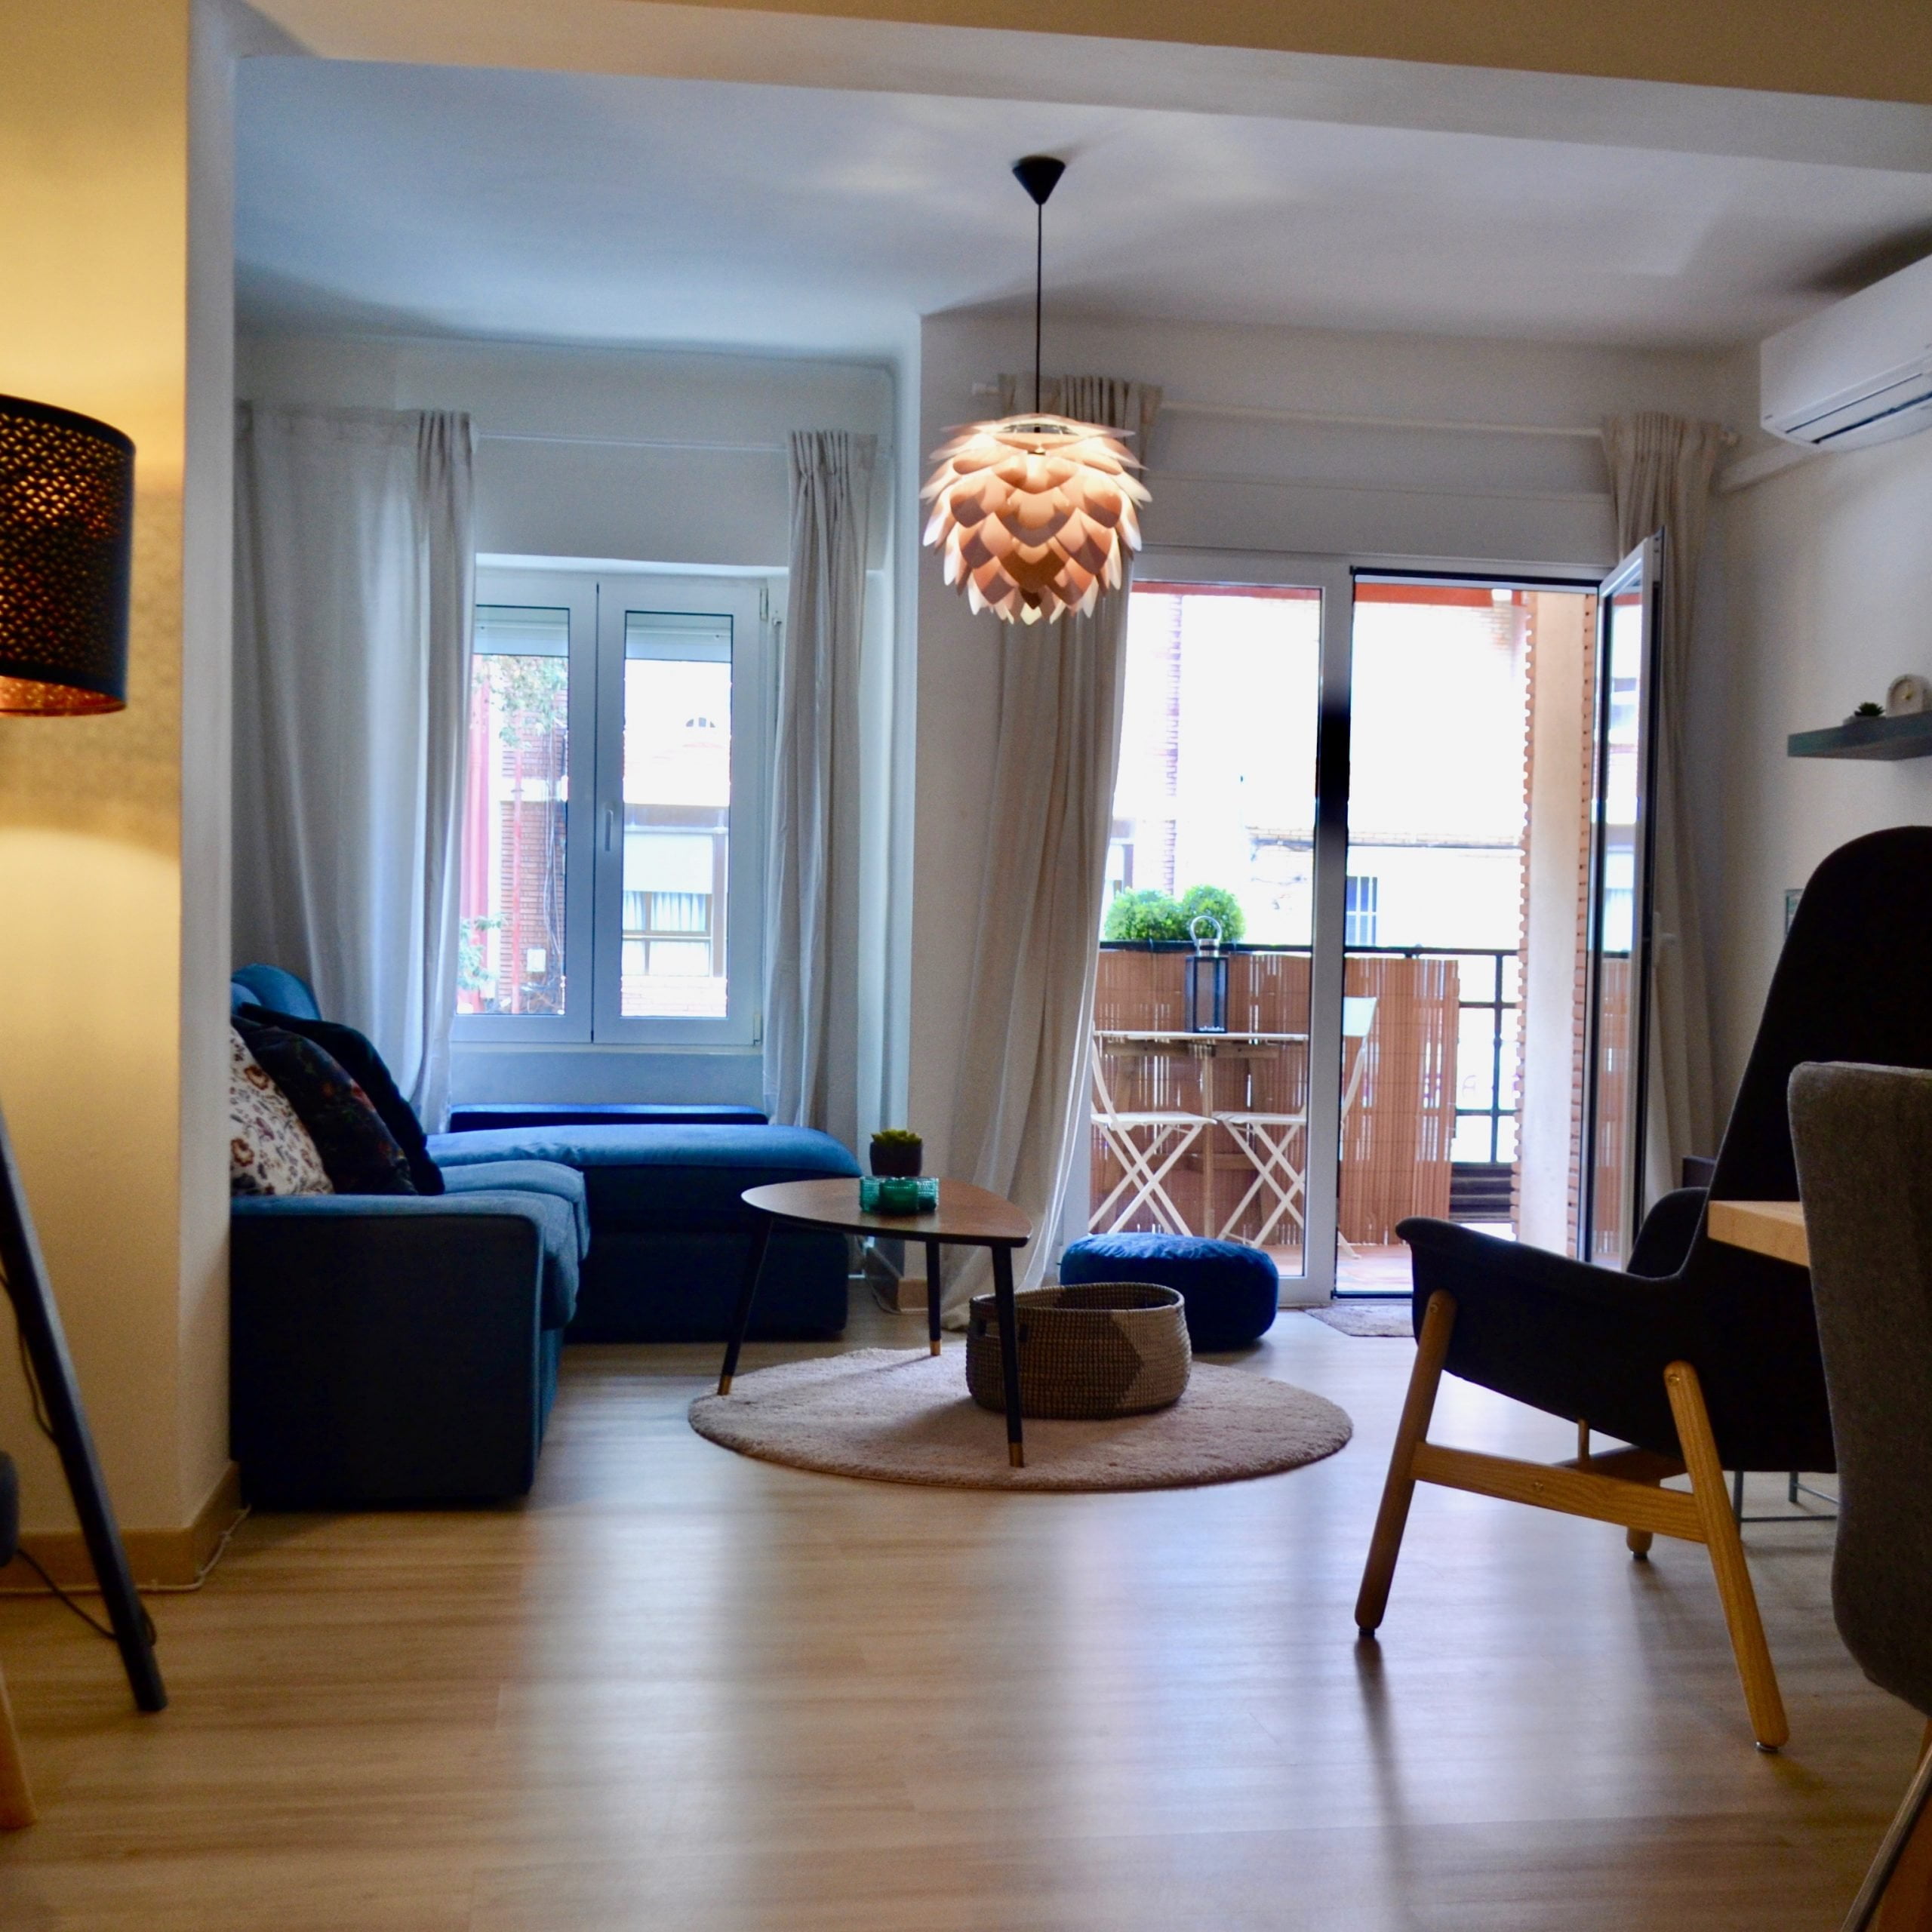 Accommodation for expats in Valencia